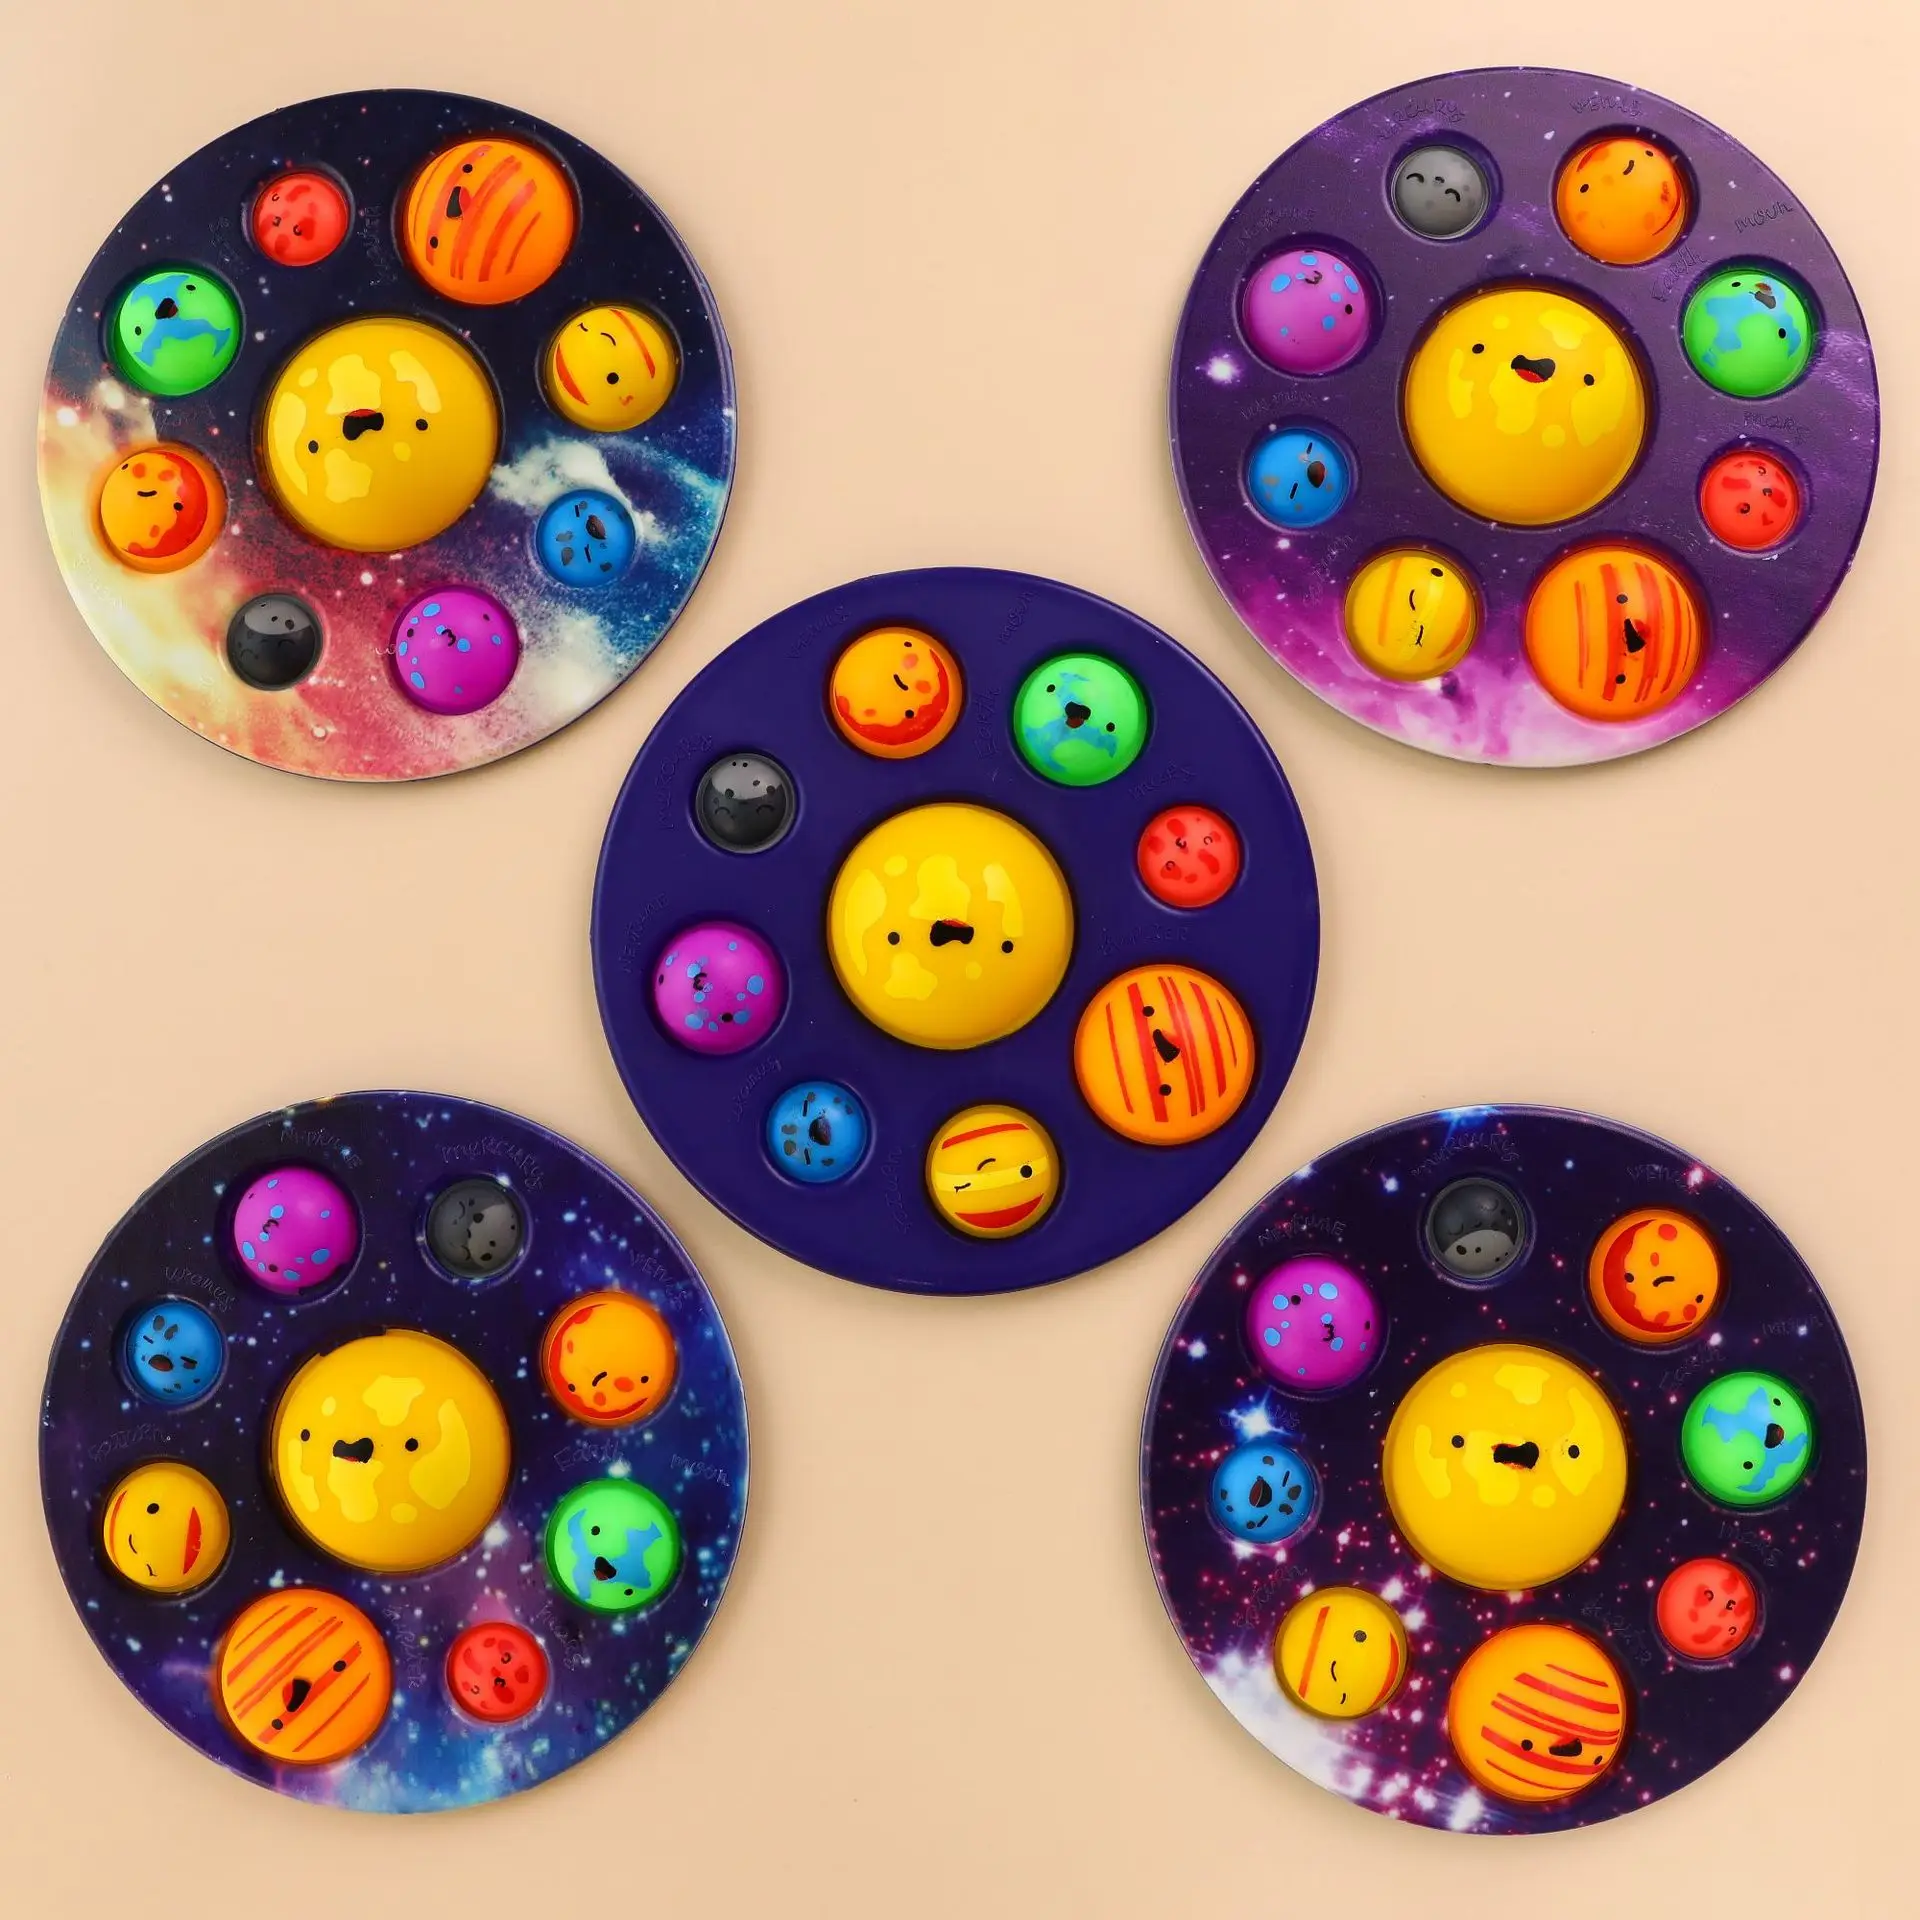 New Fashion Planet Painting Soft Squishy Press Push Bubble Anti-Stress Relieve Fidgets Adult Child Sensory Squeeze Toy for Kids